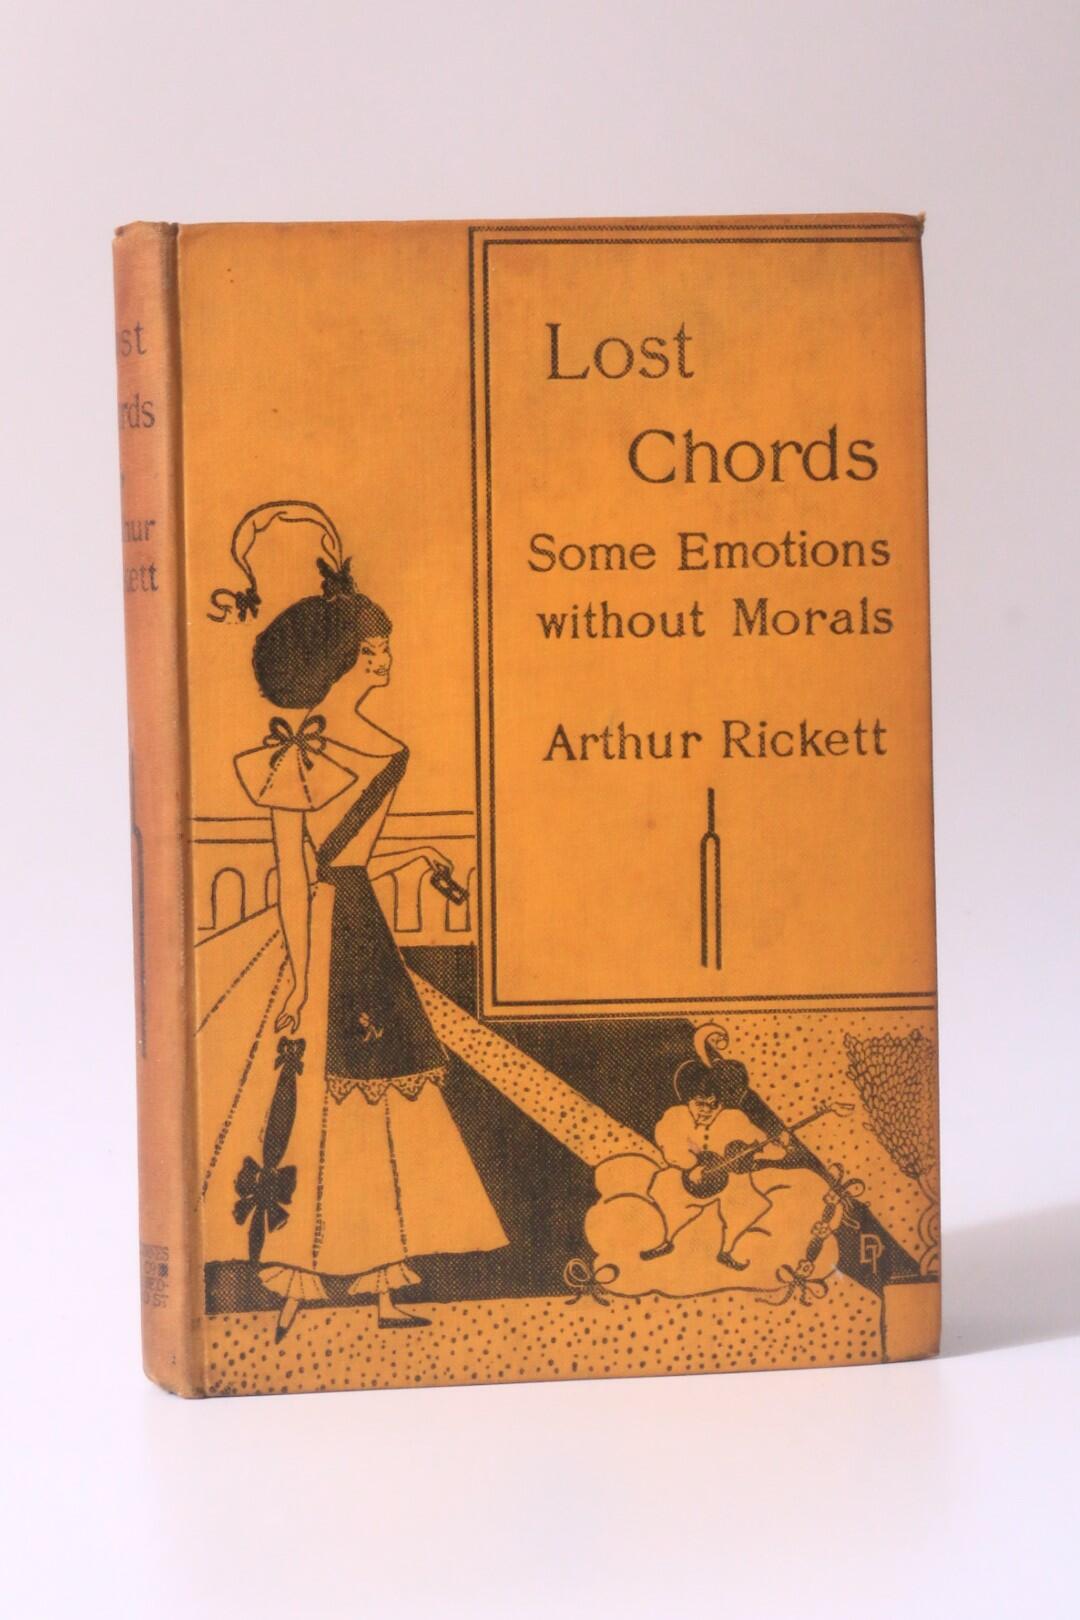 Arthur Rickett - Lost Chords: Some Emotions with Morals - A.D. Innes, 1895, First Edition. Signed